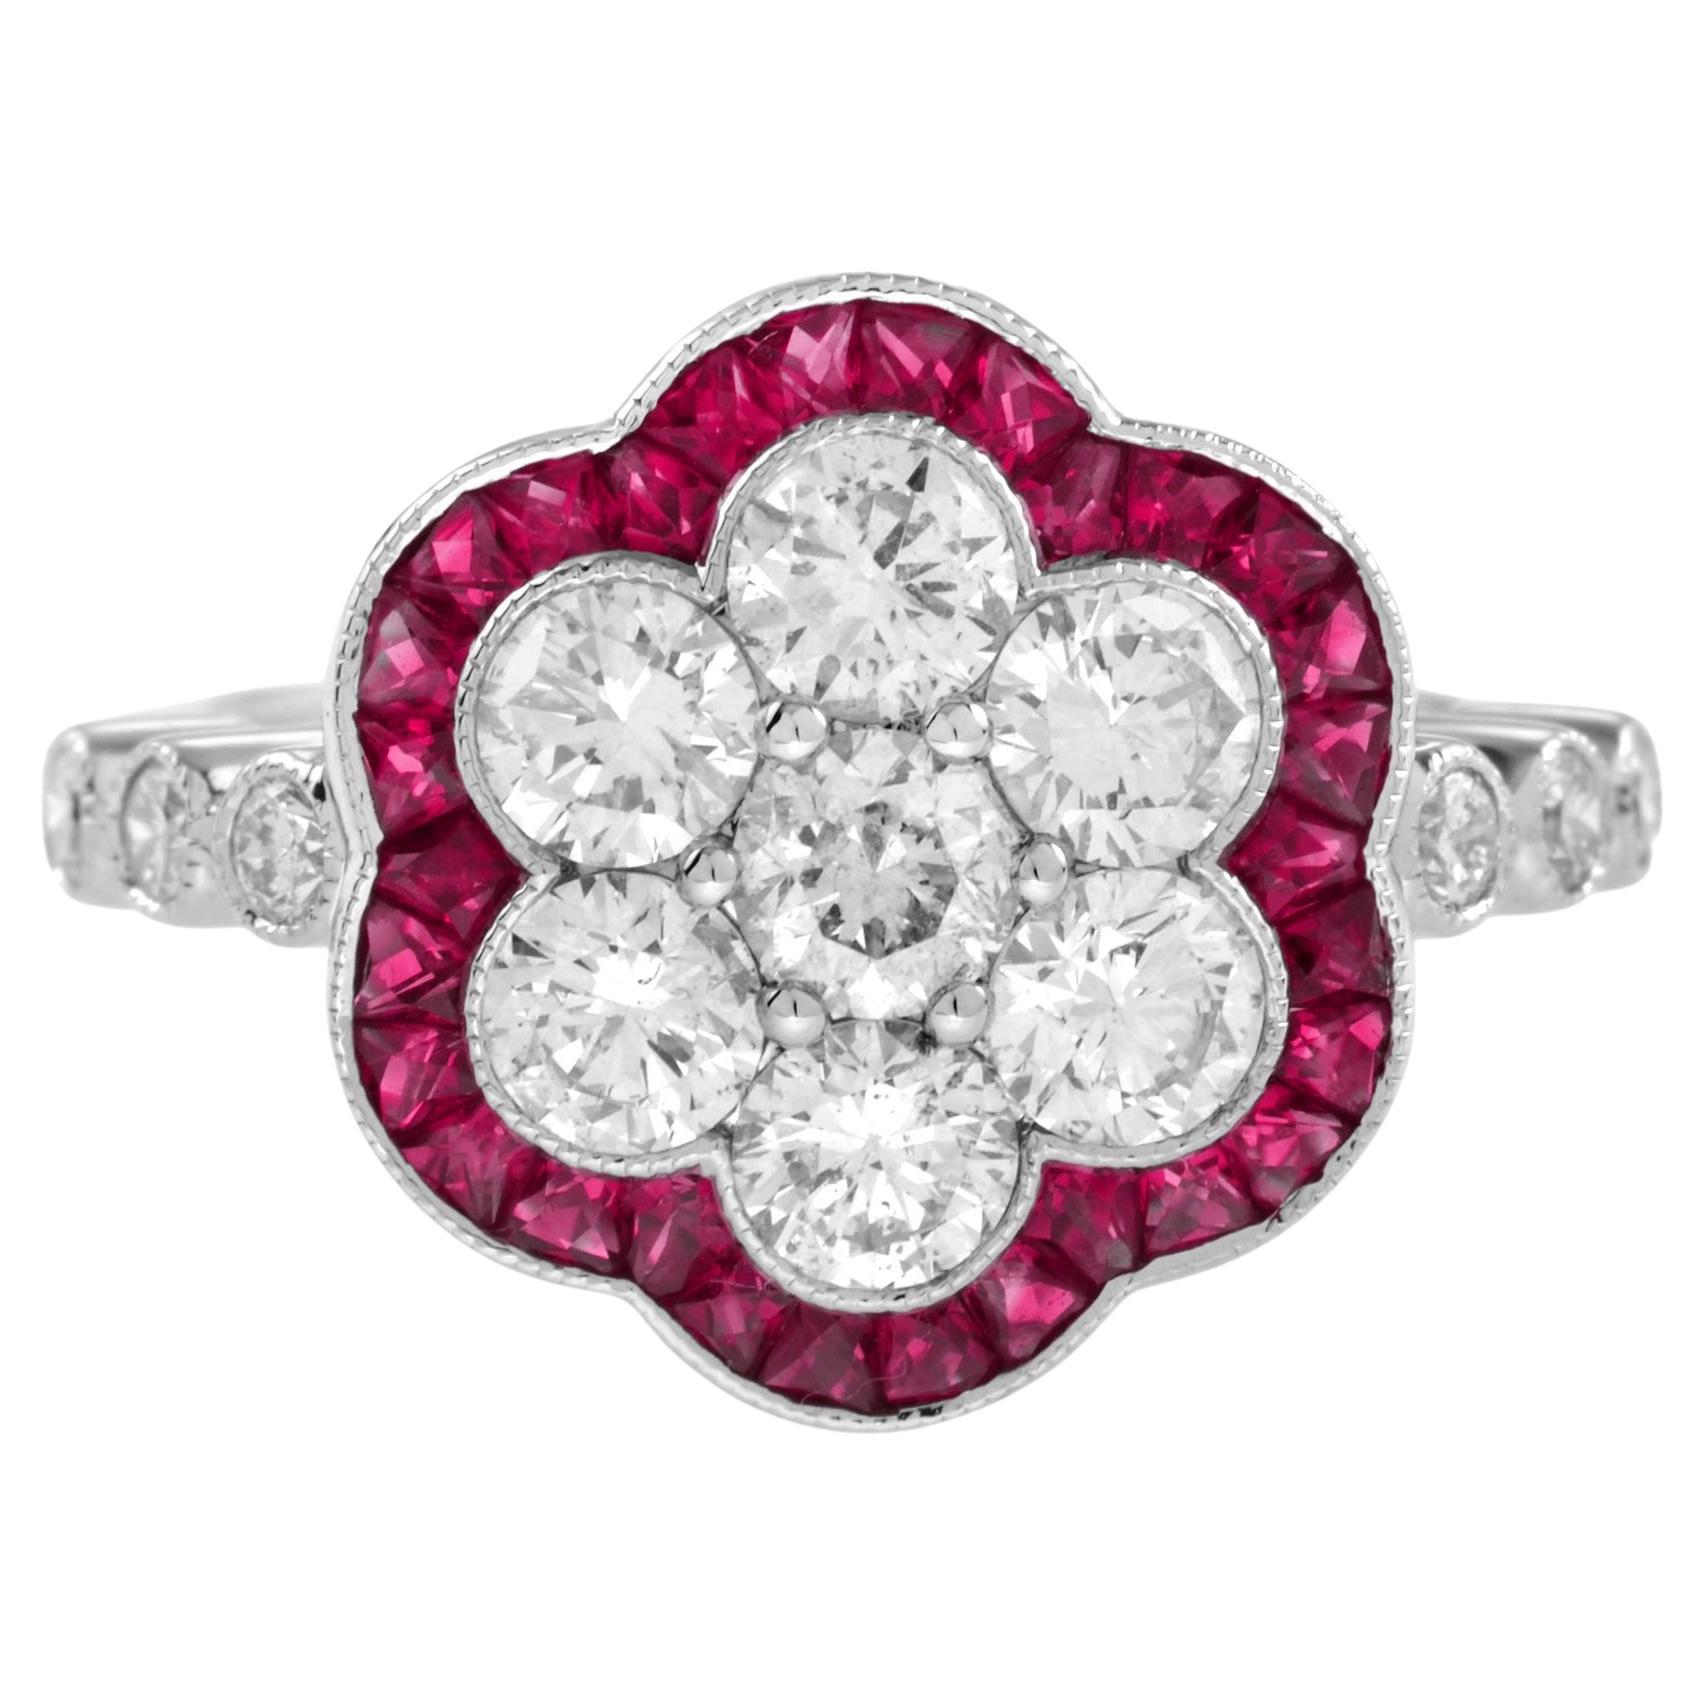 Diamond Cluster and Ruby Art Deco Style Ring in 18K White Gold